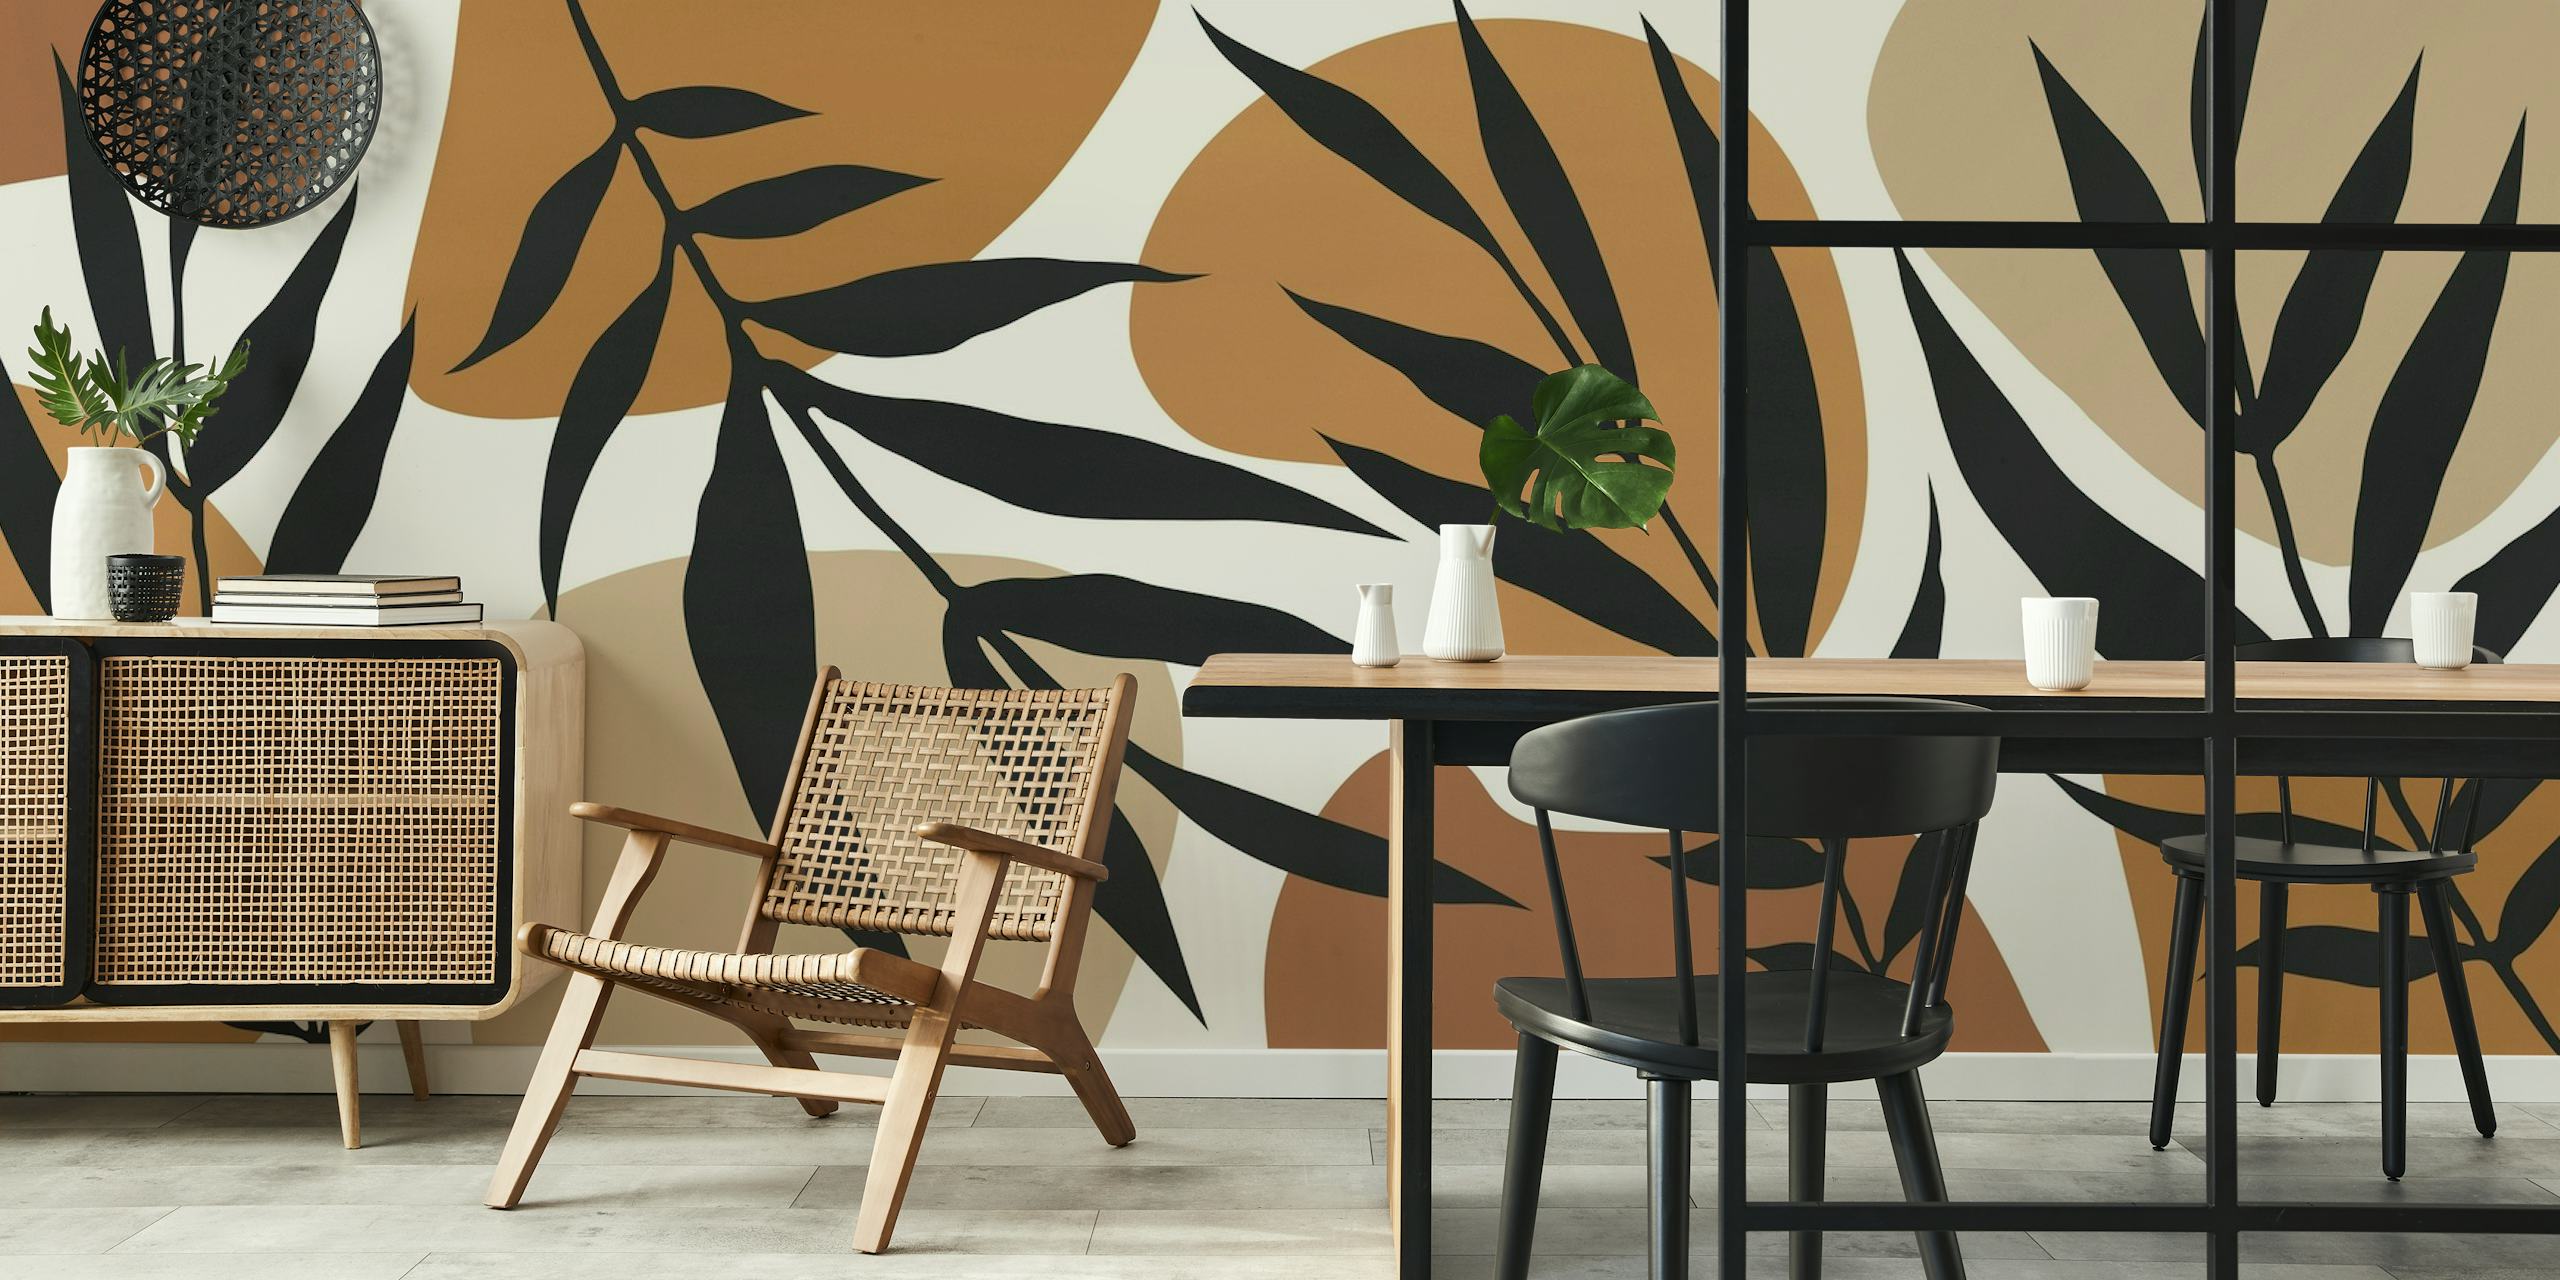 Tropical Leaves 02 wall mural featuring stylized foliage in earthy tones